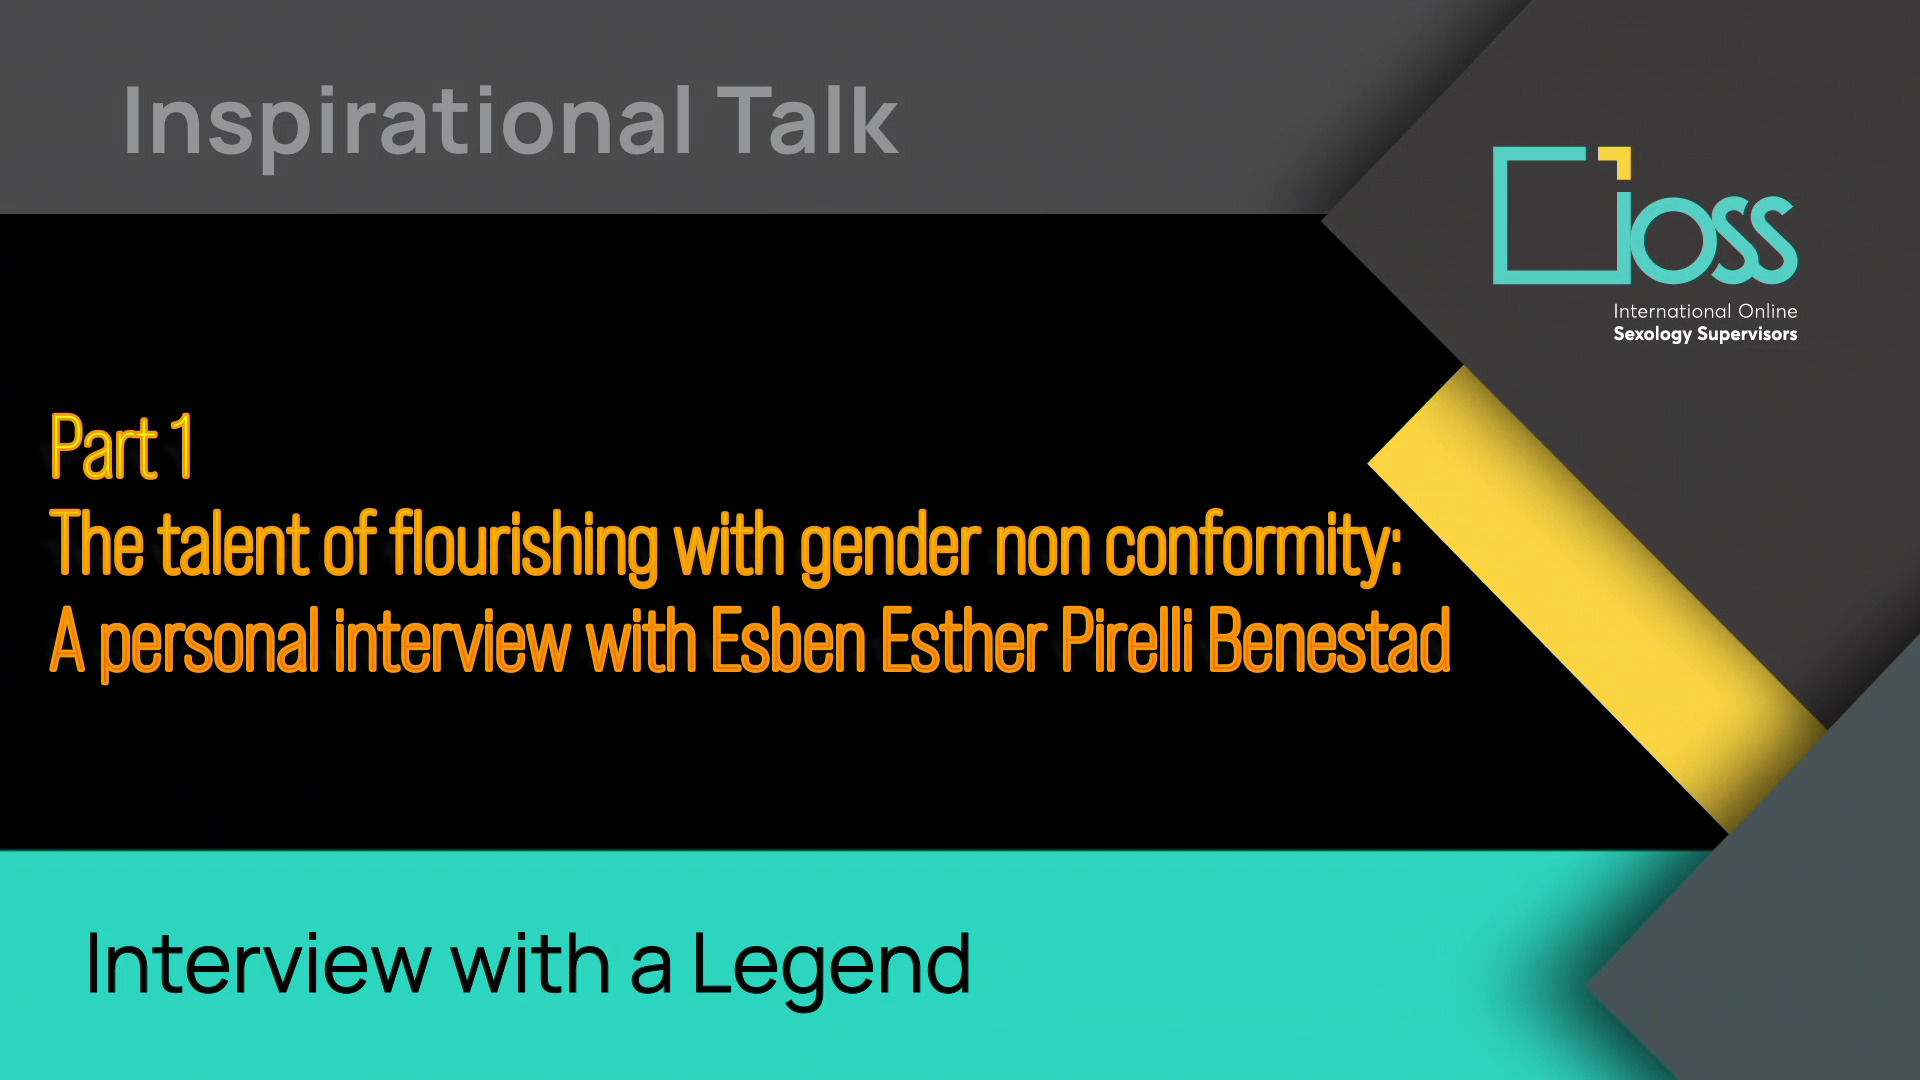 Part 1 The talent of flourishing with gender non conformity: A personal interview with Esben Esther Pirelli Benestad (Part 1 & 2)